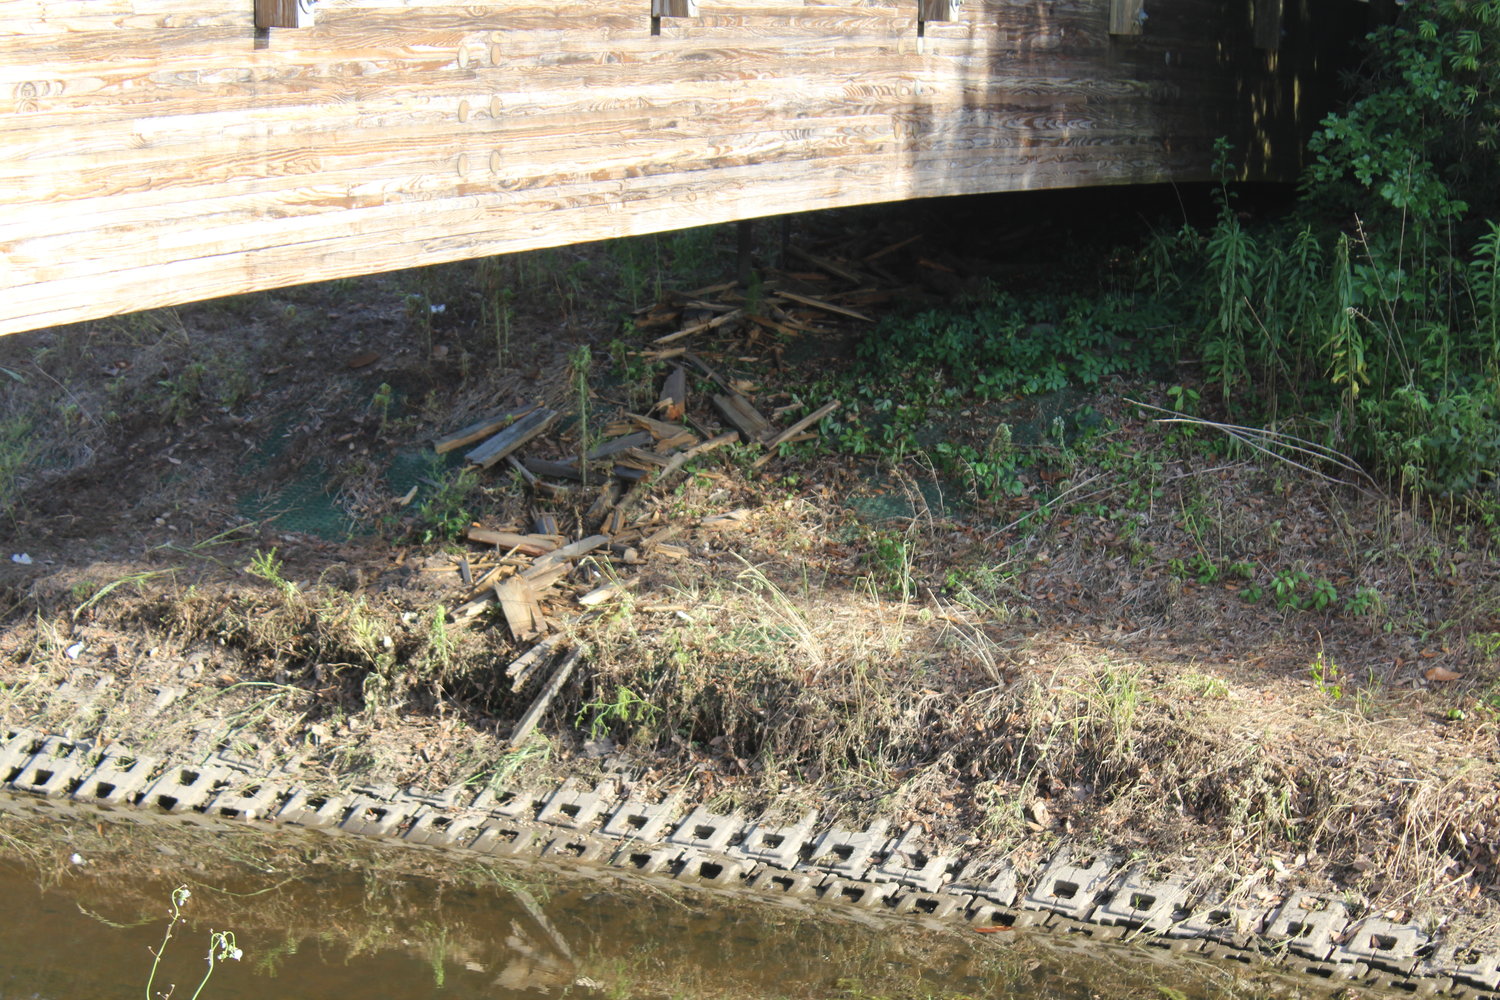 The City Public Works Department will handle the remaining cleanup under the bridge.